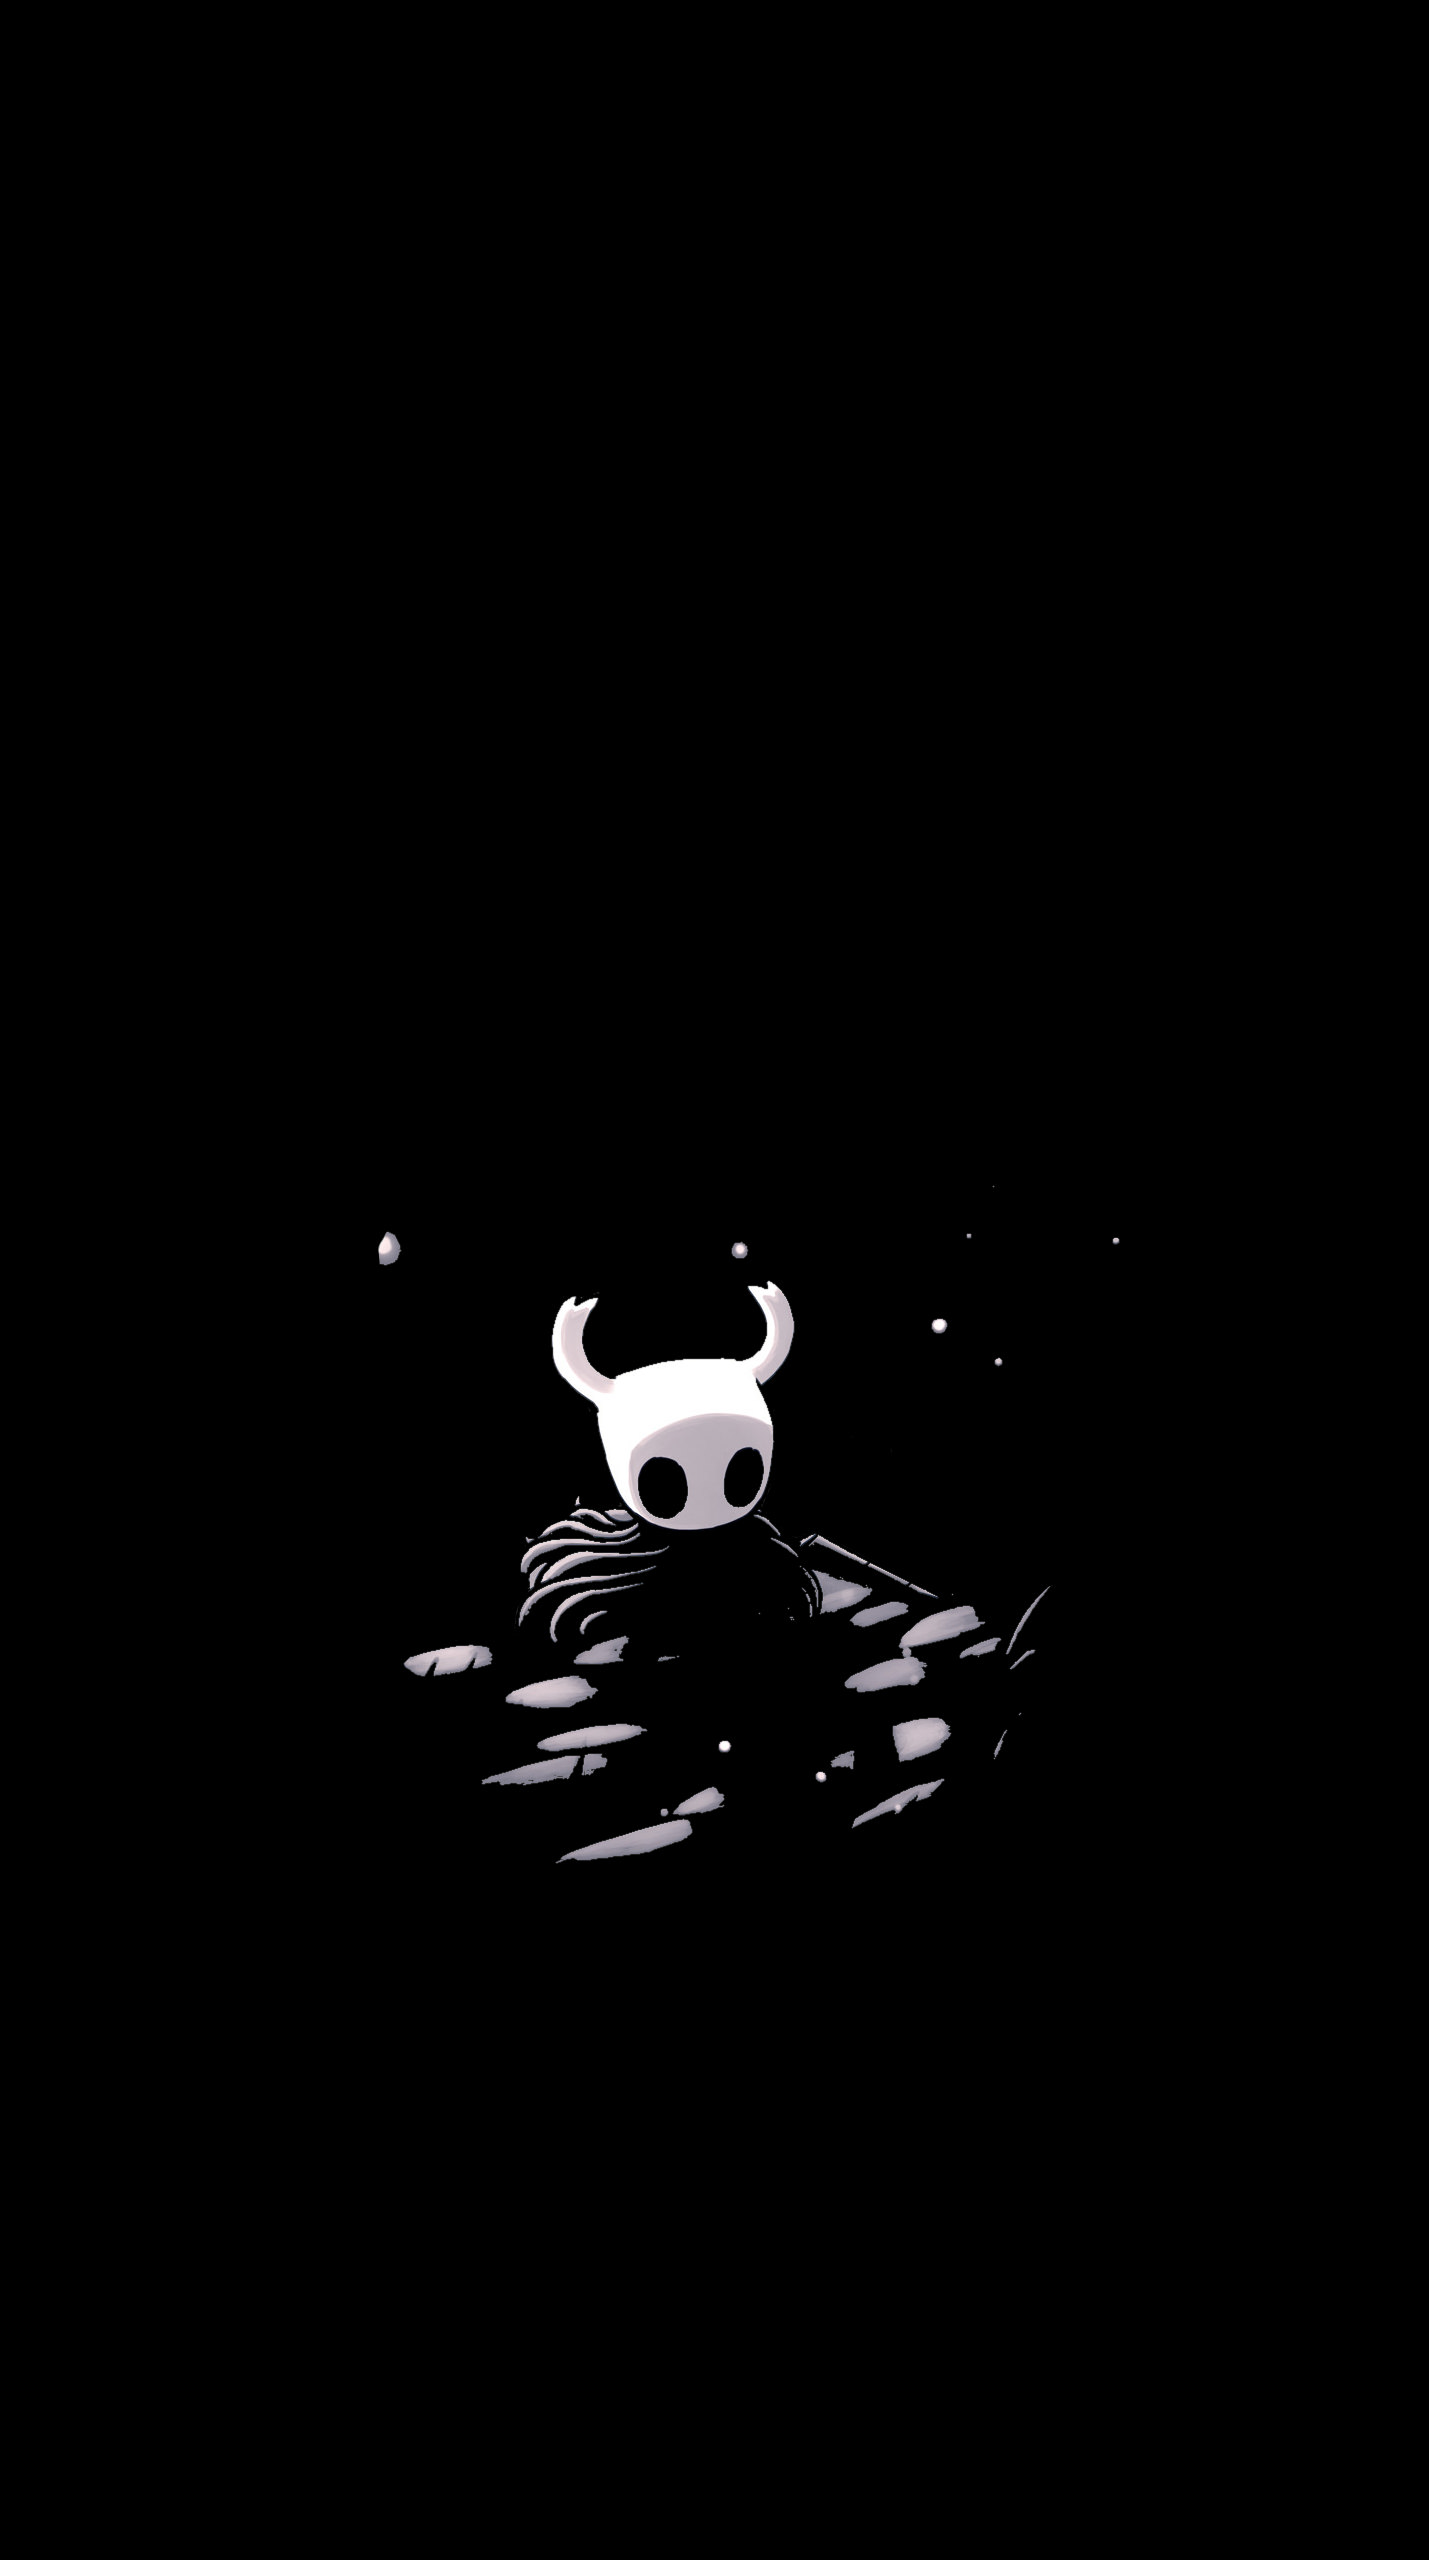 Hollow Knight Amoled Wallpaper For Mobile R Hollowknight